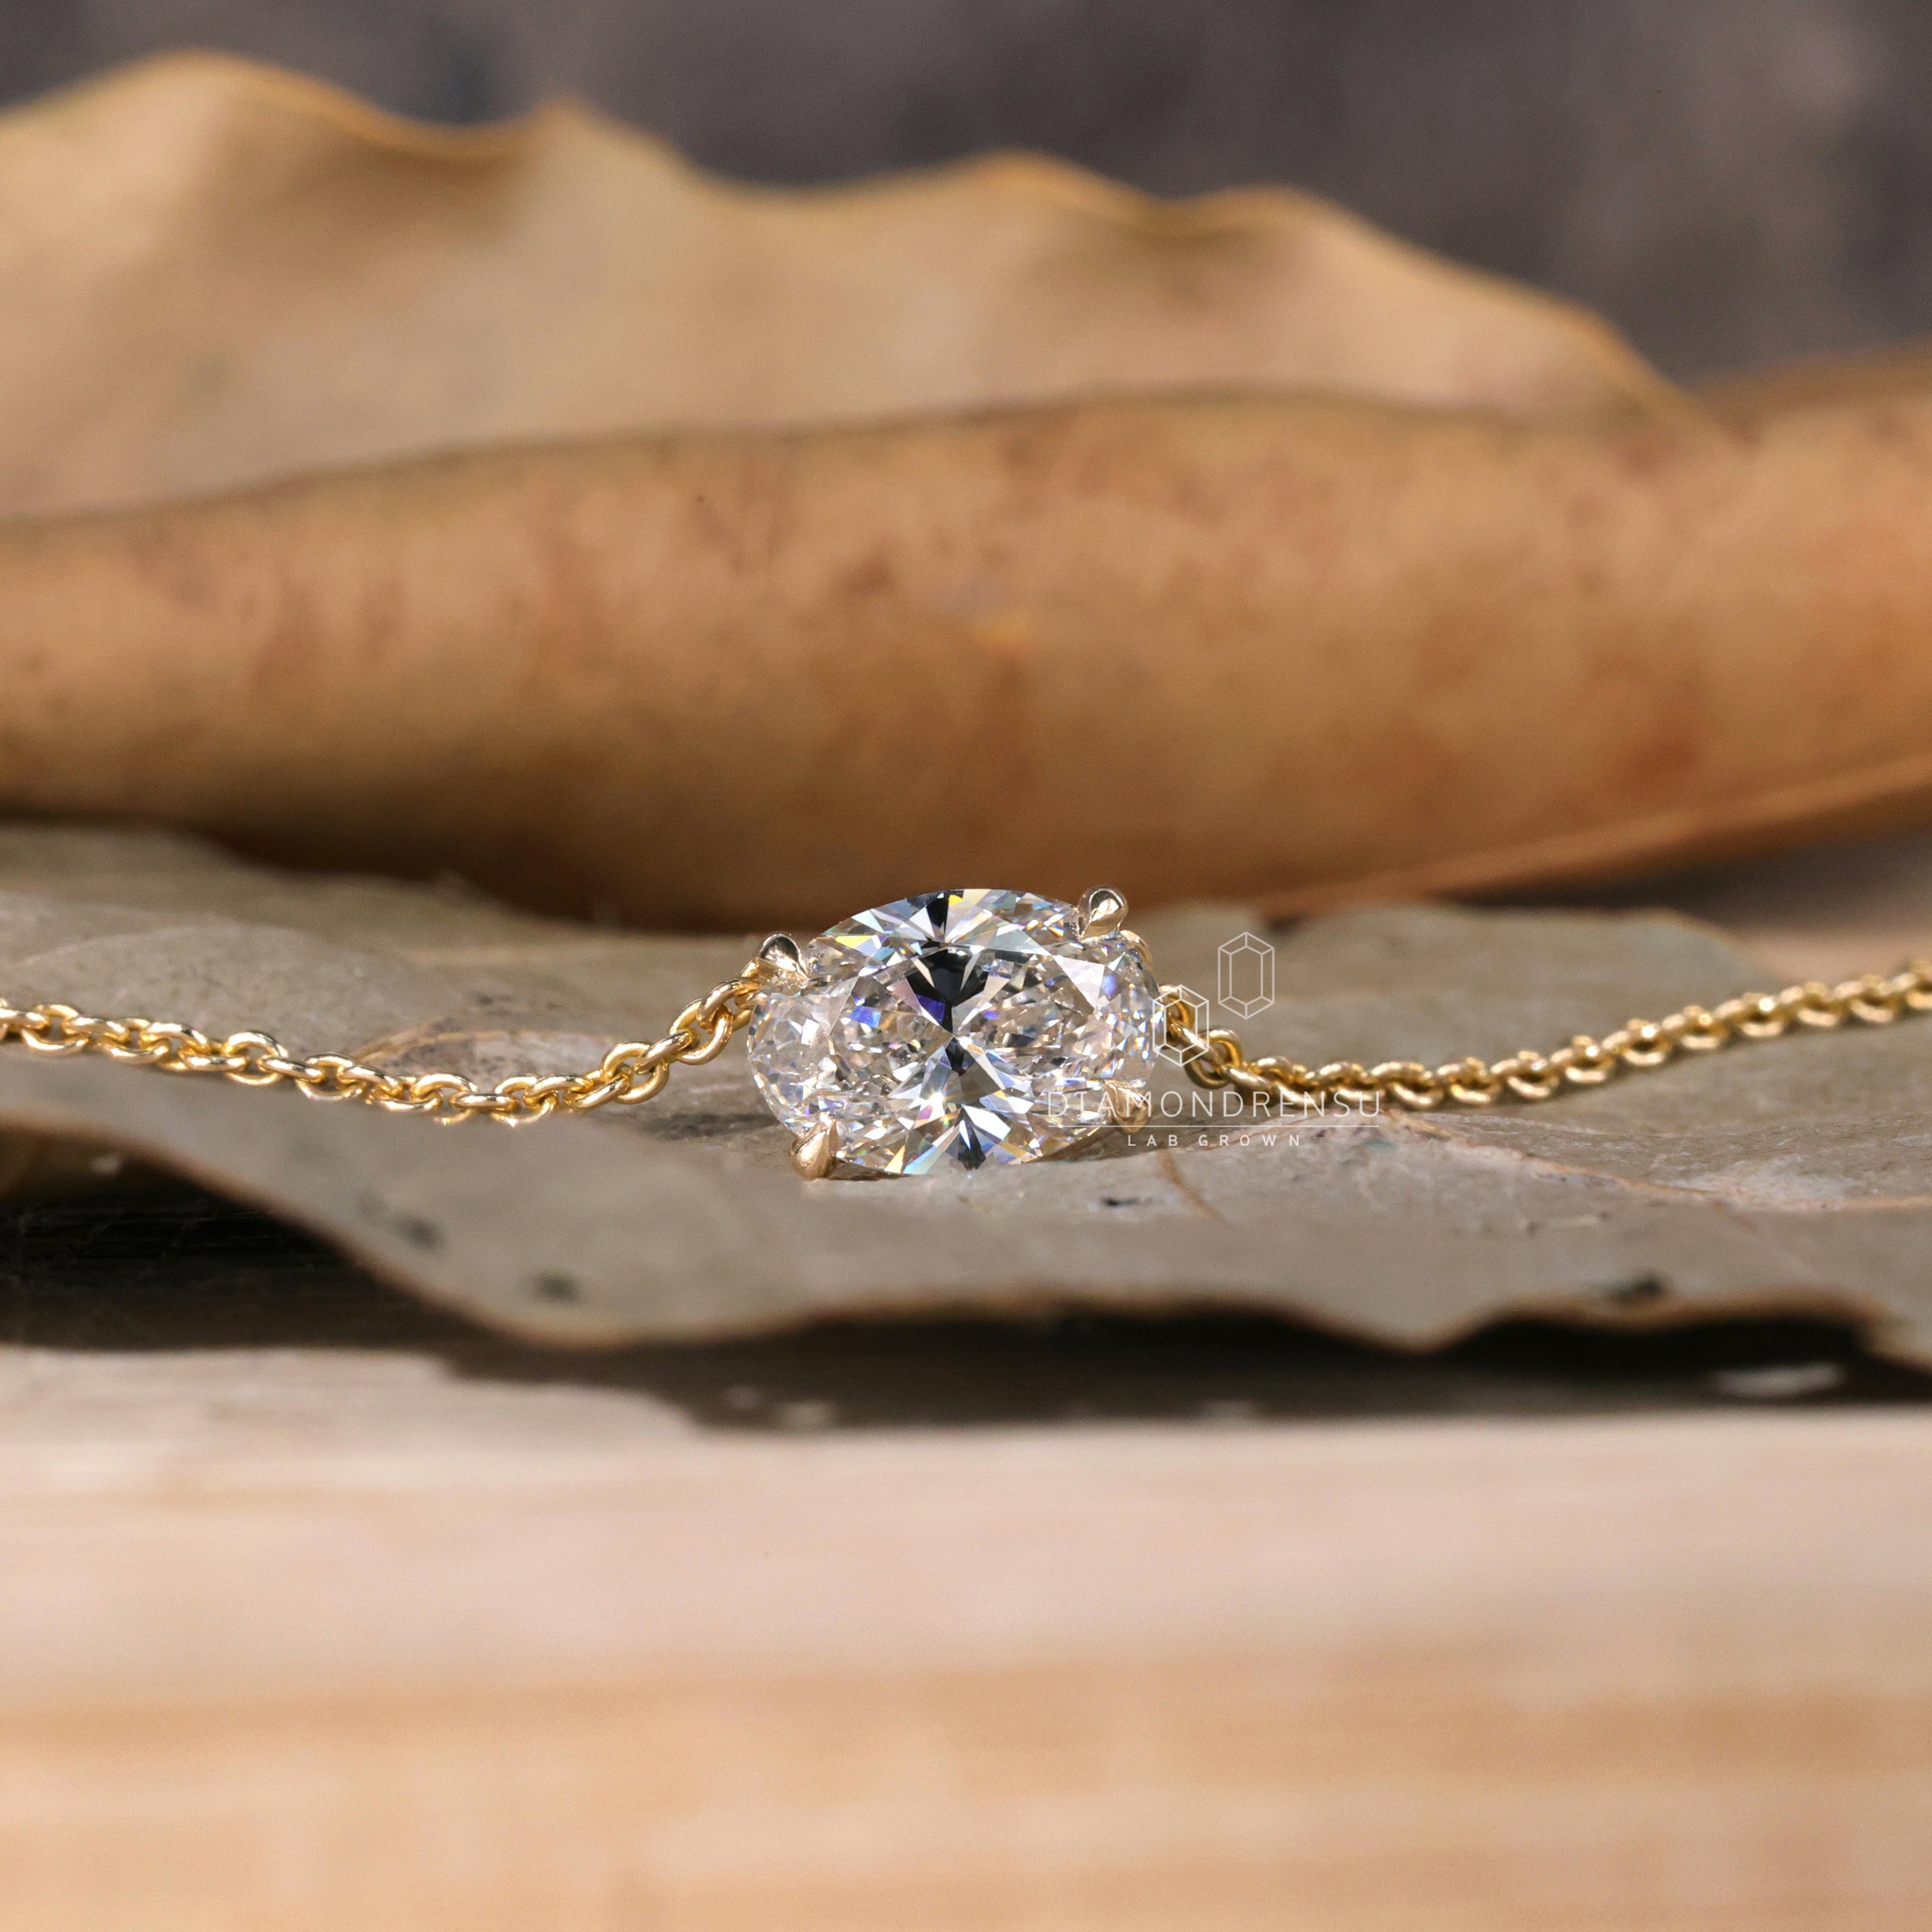 How to reset a diamond as a necklace. – SPUR Jewelry Project